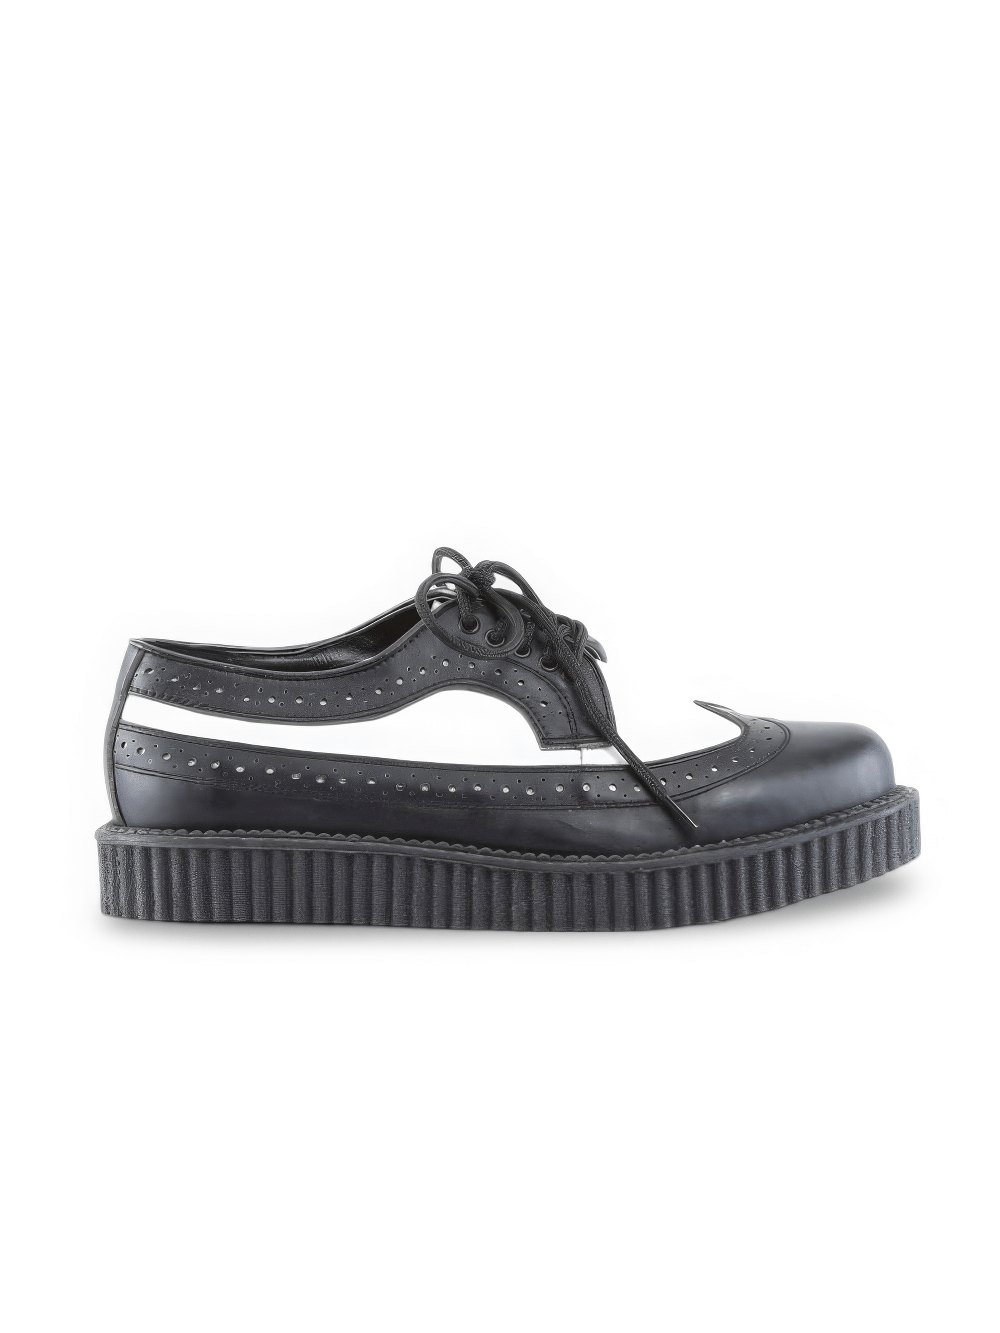 DEMONIA Black and White Rockabilly Punk Creepers